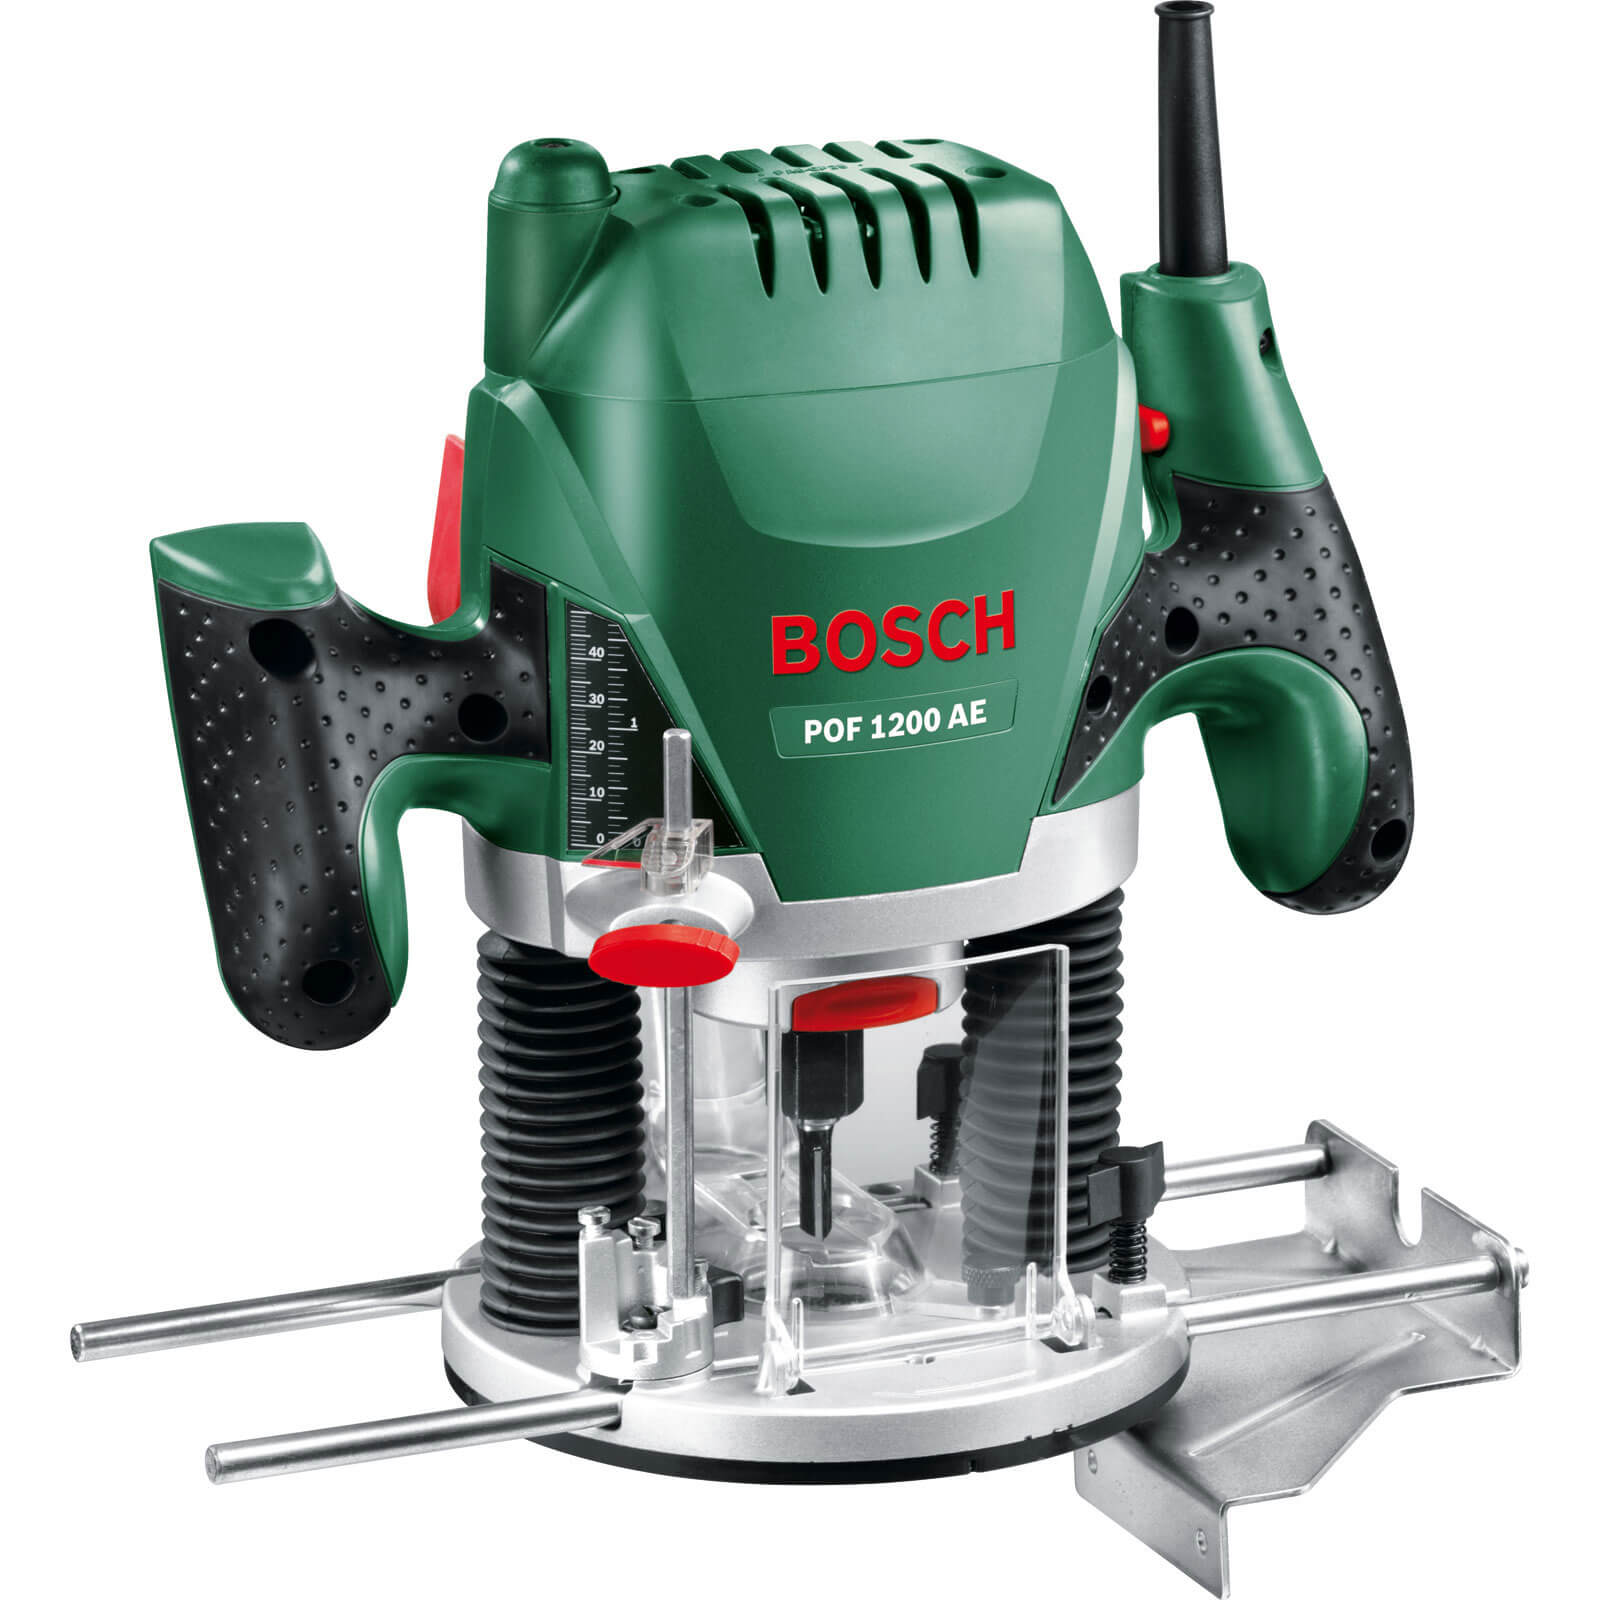 Image of Bosch POF 1200AE 1/4" Plunge Router 240v